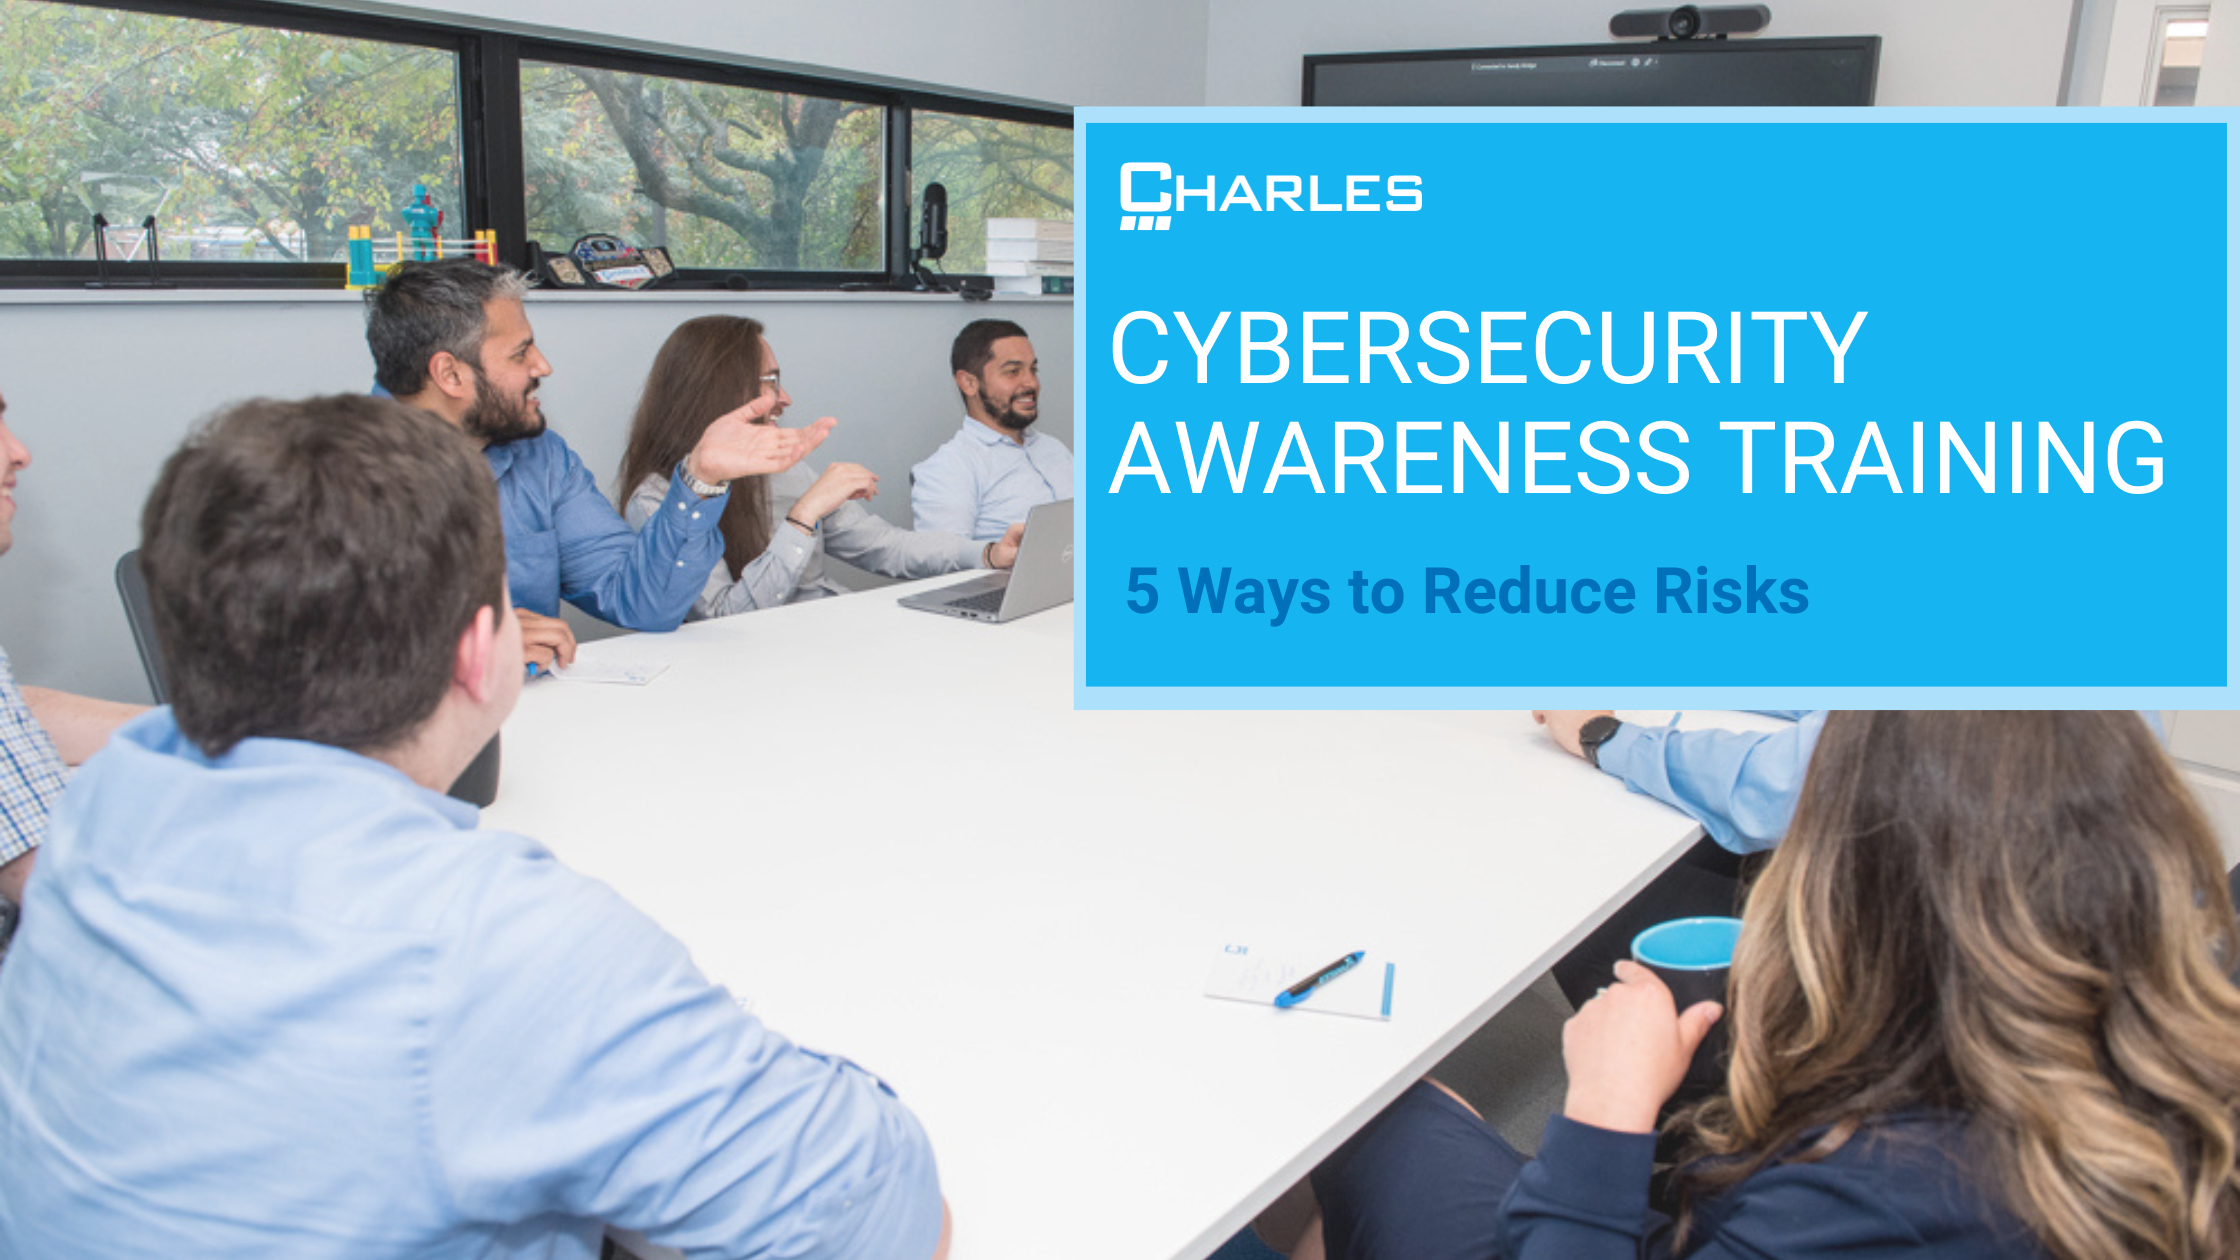 Cybersecurity Awareness Training for Employees: 5 Way to Reduce Risks